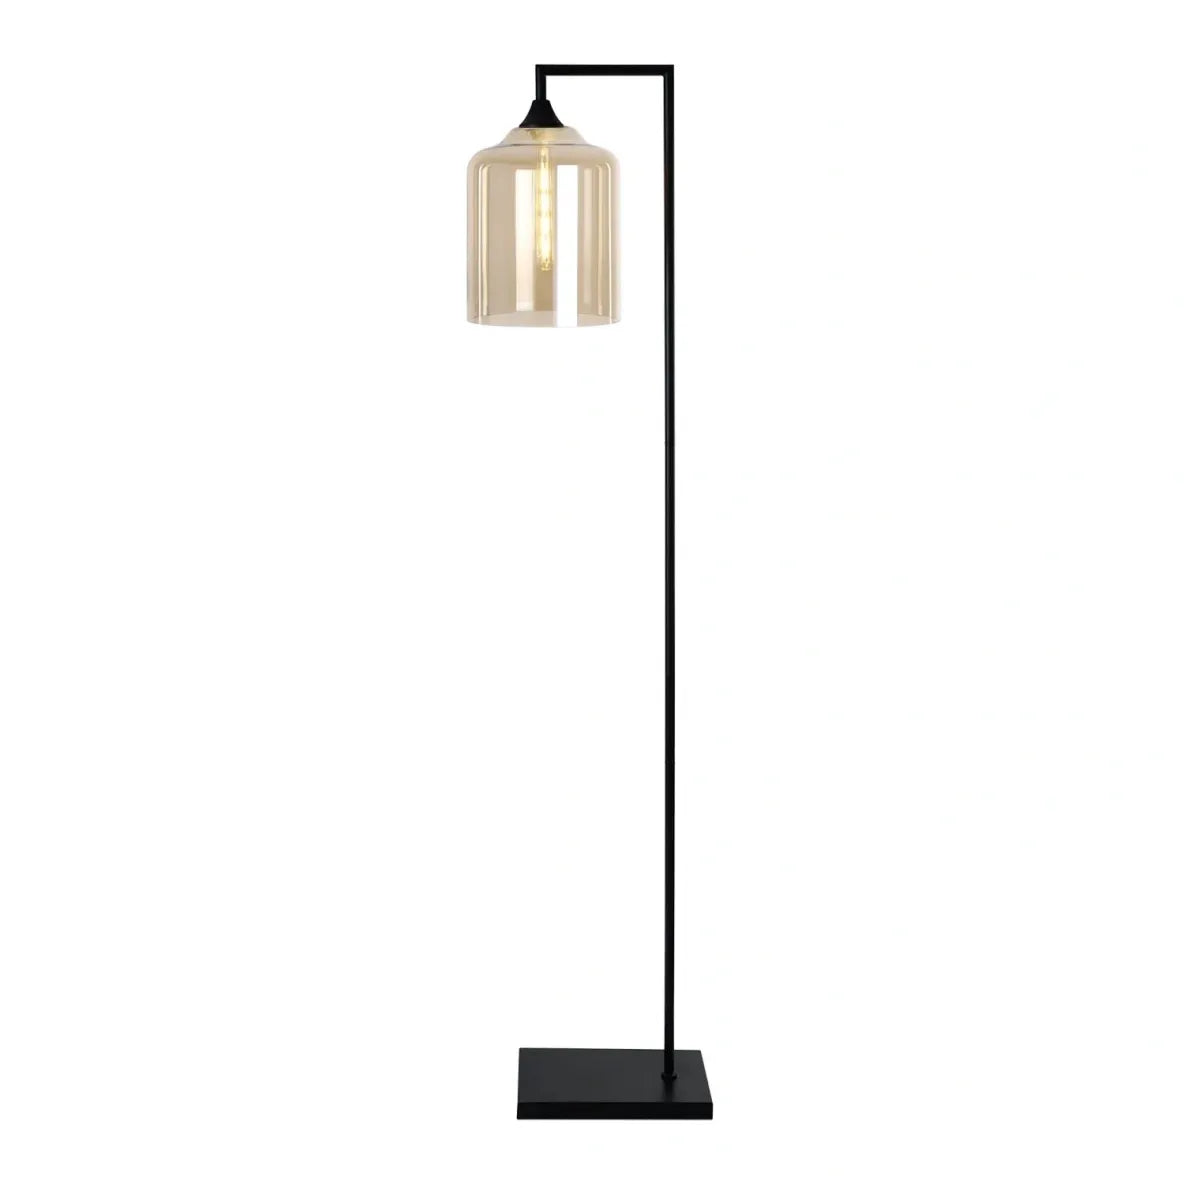 Murano Black Floor Lamp with Large Cylinder Glass Shade